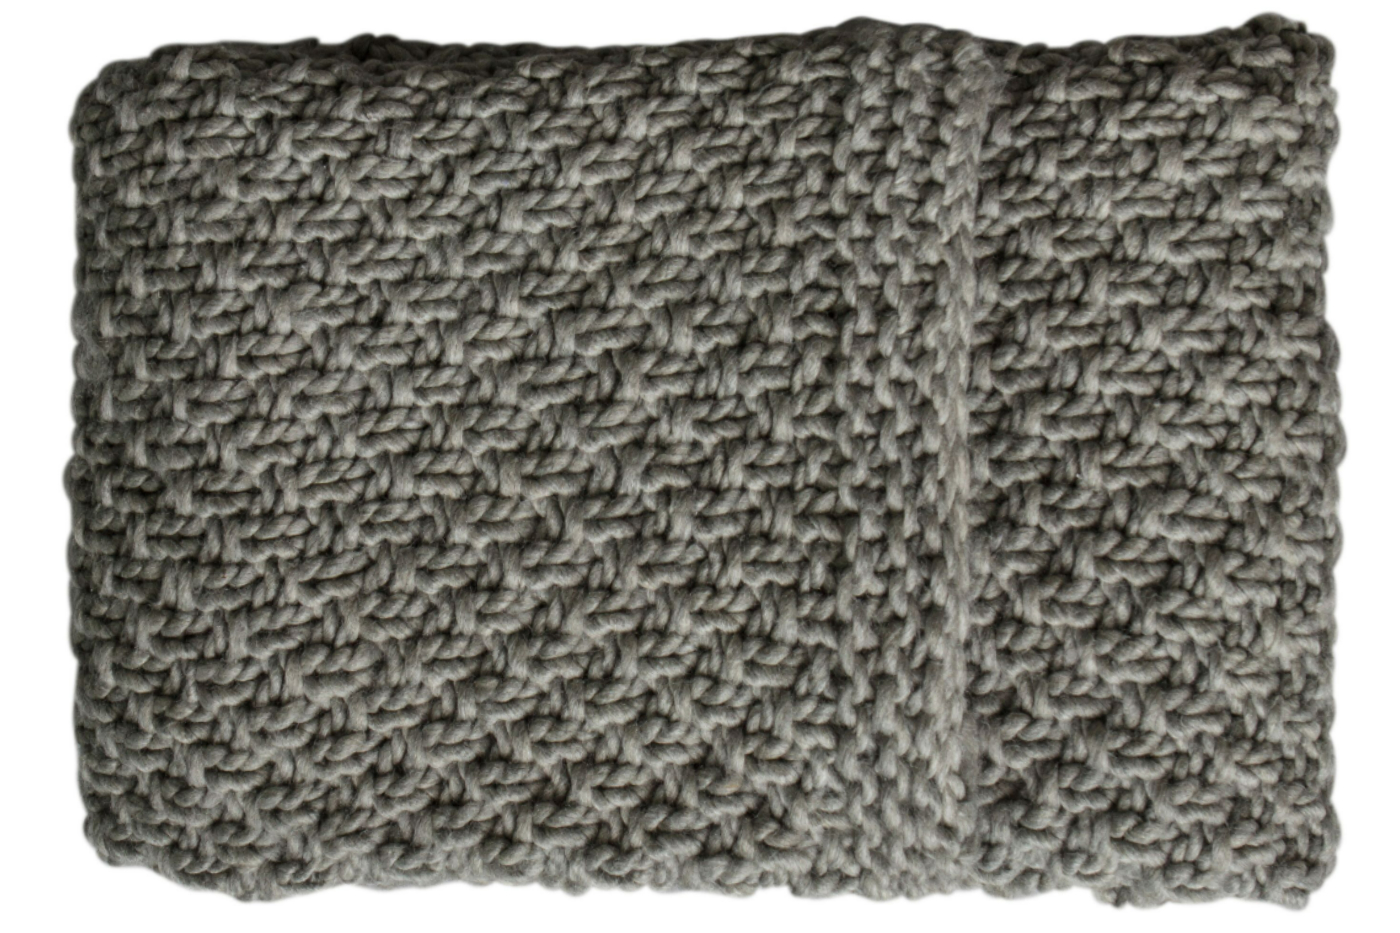 View Grey Chunky Knitted Moss Stitched Throw 1700 x 1300mm information